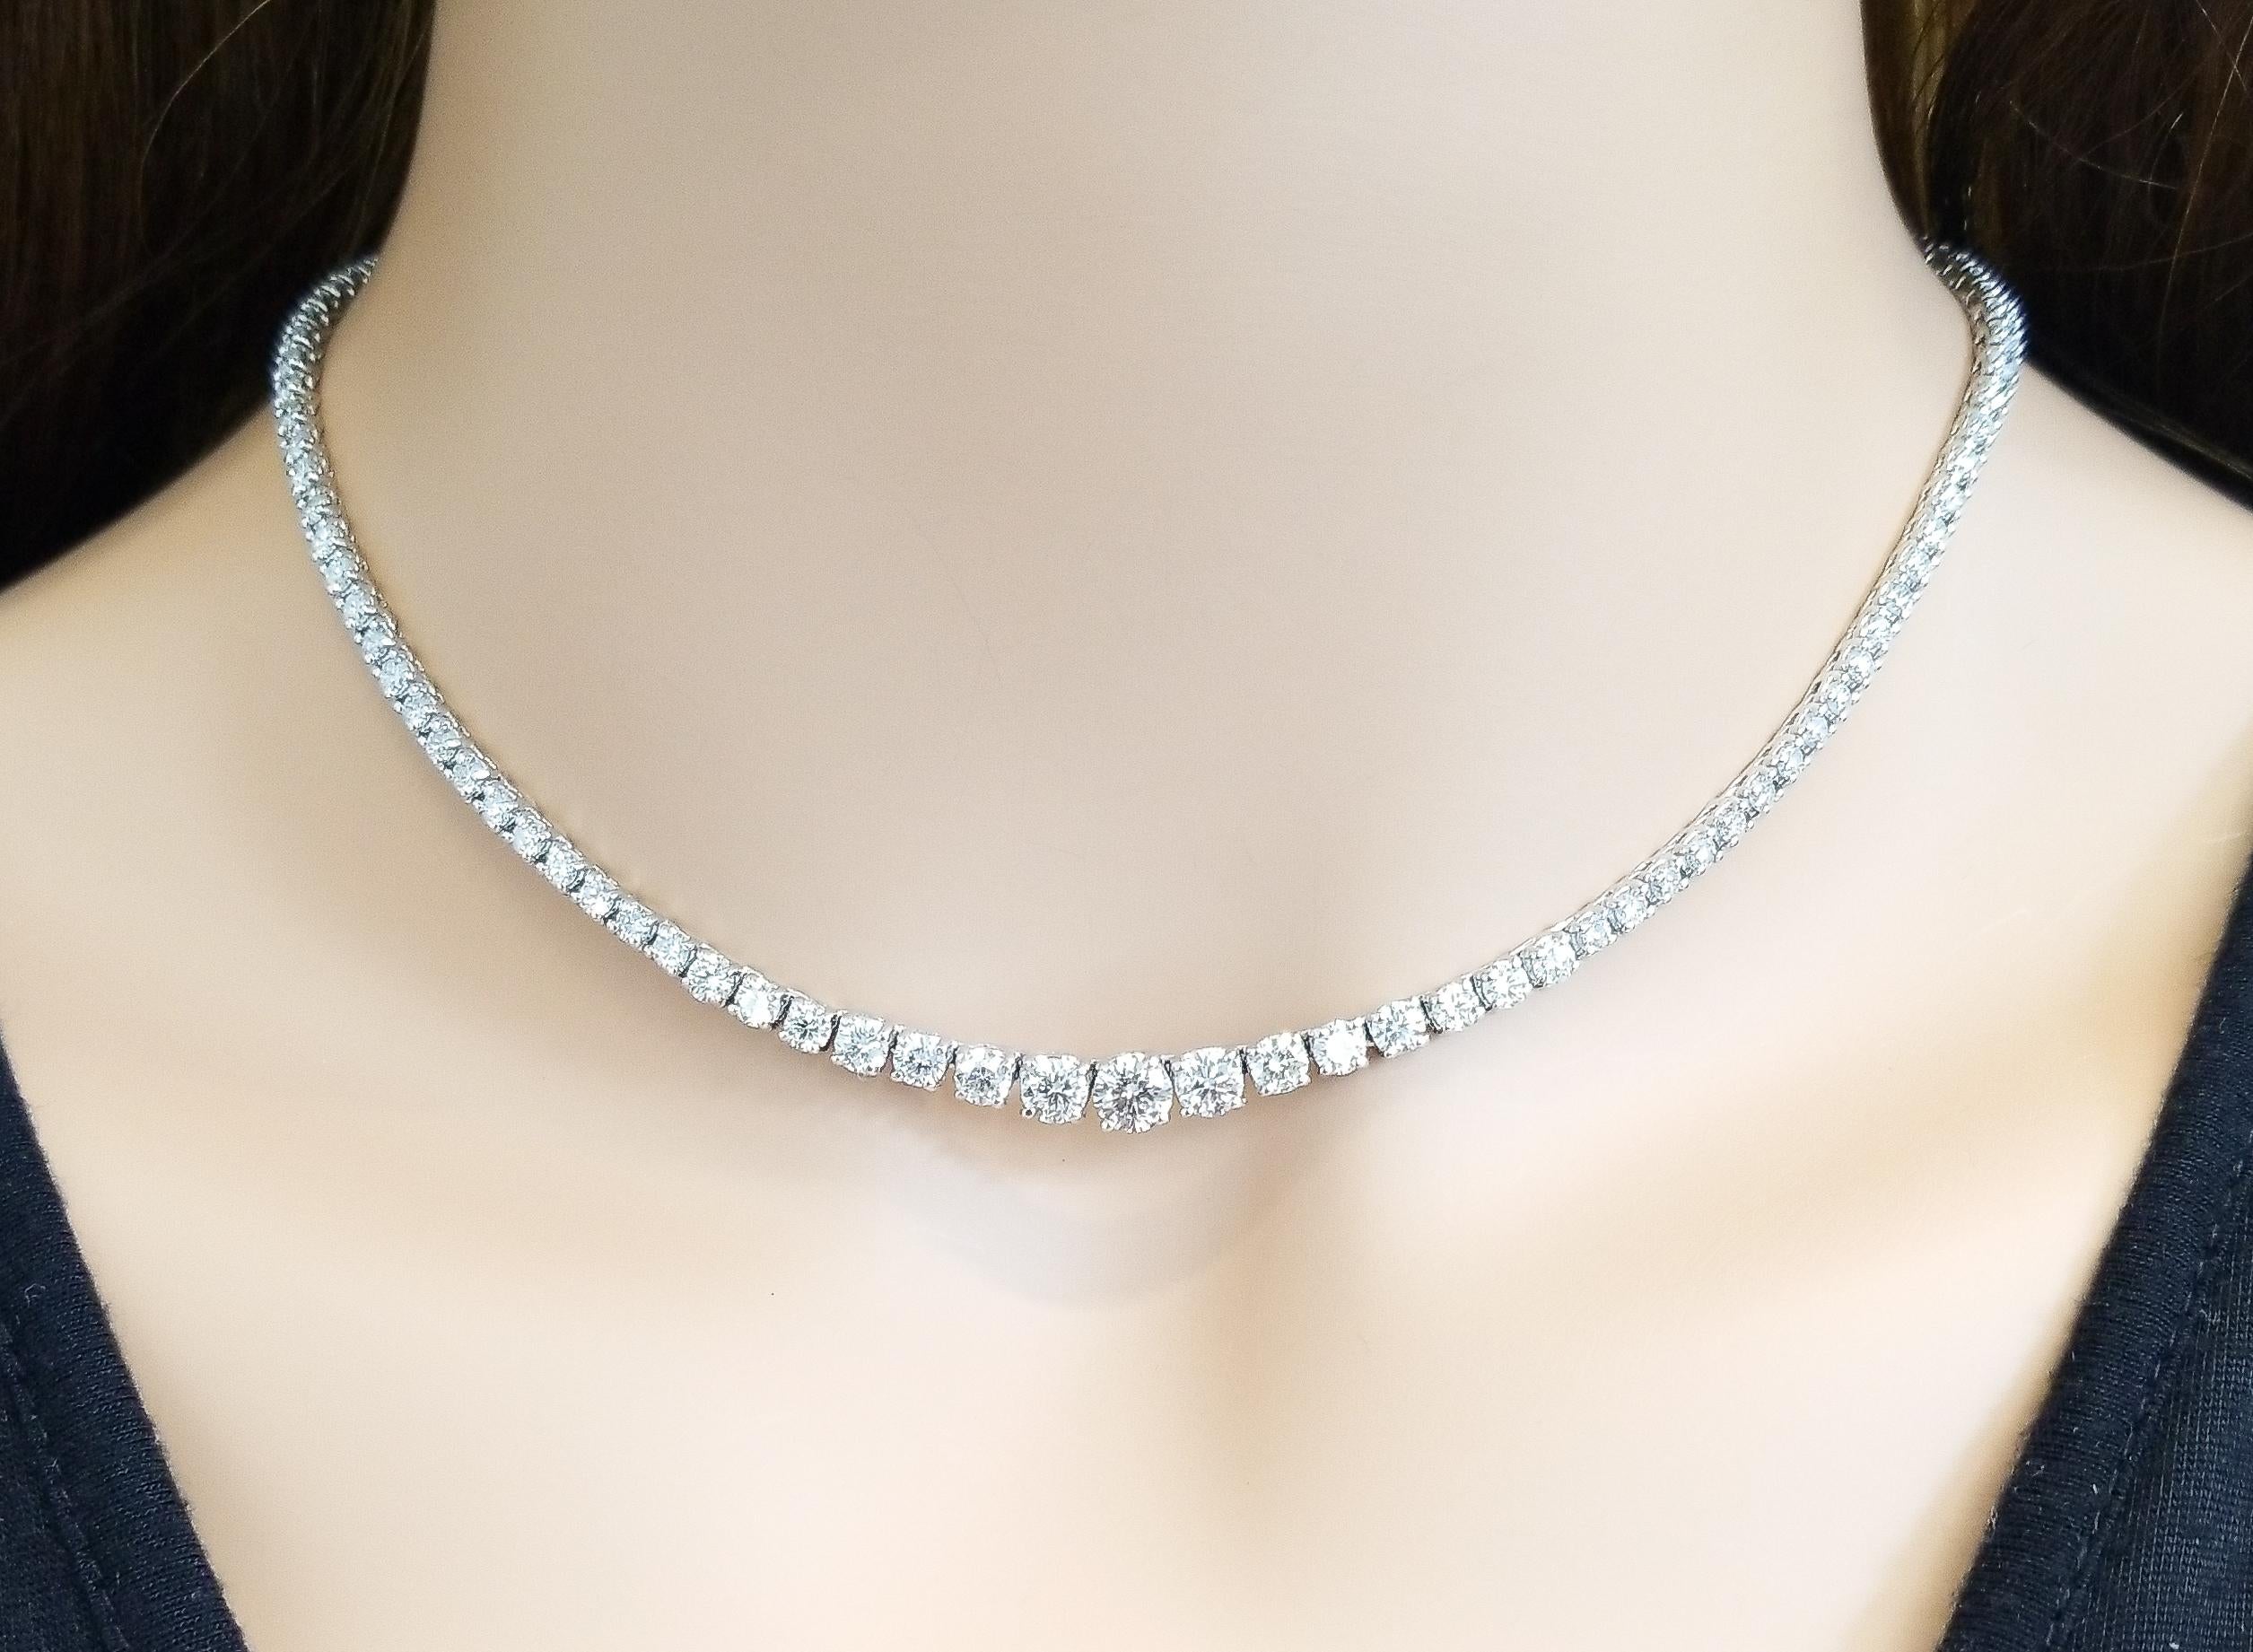 This is a riviera necklace that deserves attention. It's chic and timeless. Show-stopping in fire and brilliance, this incredible riviera necklace features 125 sparkling round brilliant cut diamonds that are skillfully prong set from end to end in a